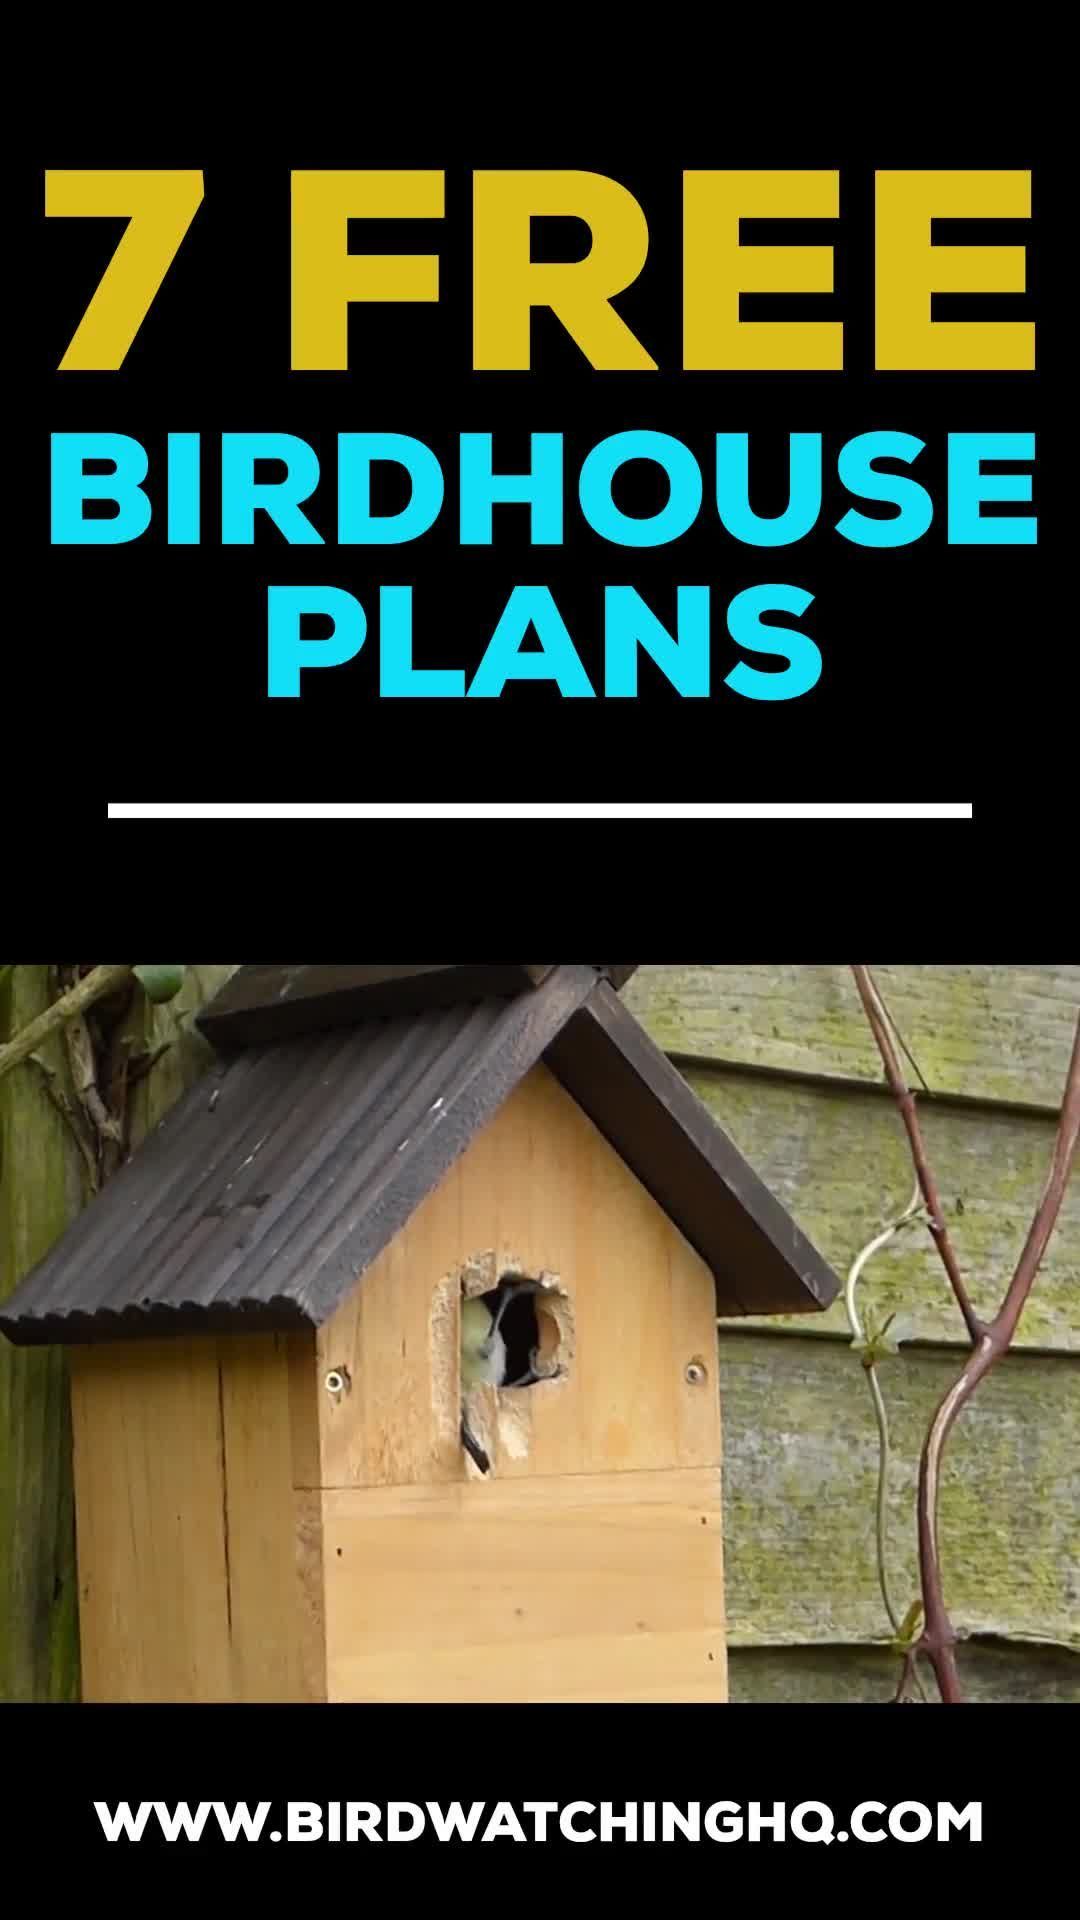 Bluebird Houses: The Definitive Guide (Includes 7 FREE Plans!) - Bird Watching HQ - Bluebird Houses: The Definitive Guide (Includes 7 FREE Plans!) - Bird Watching HQ -   17 diy House out of boxes ideas